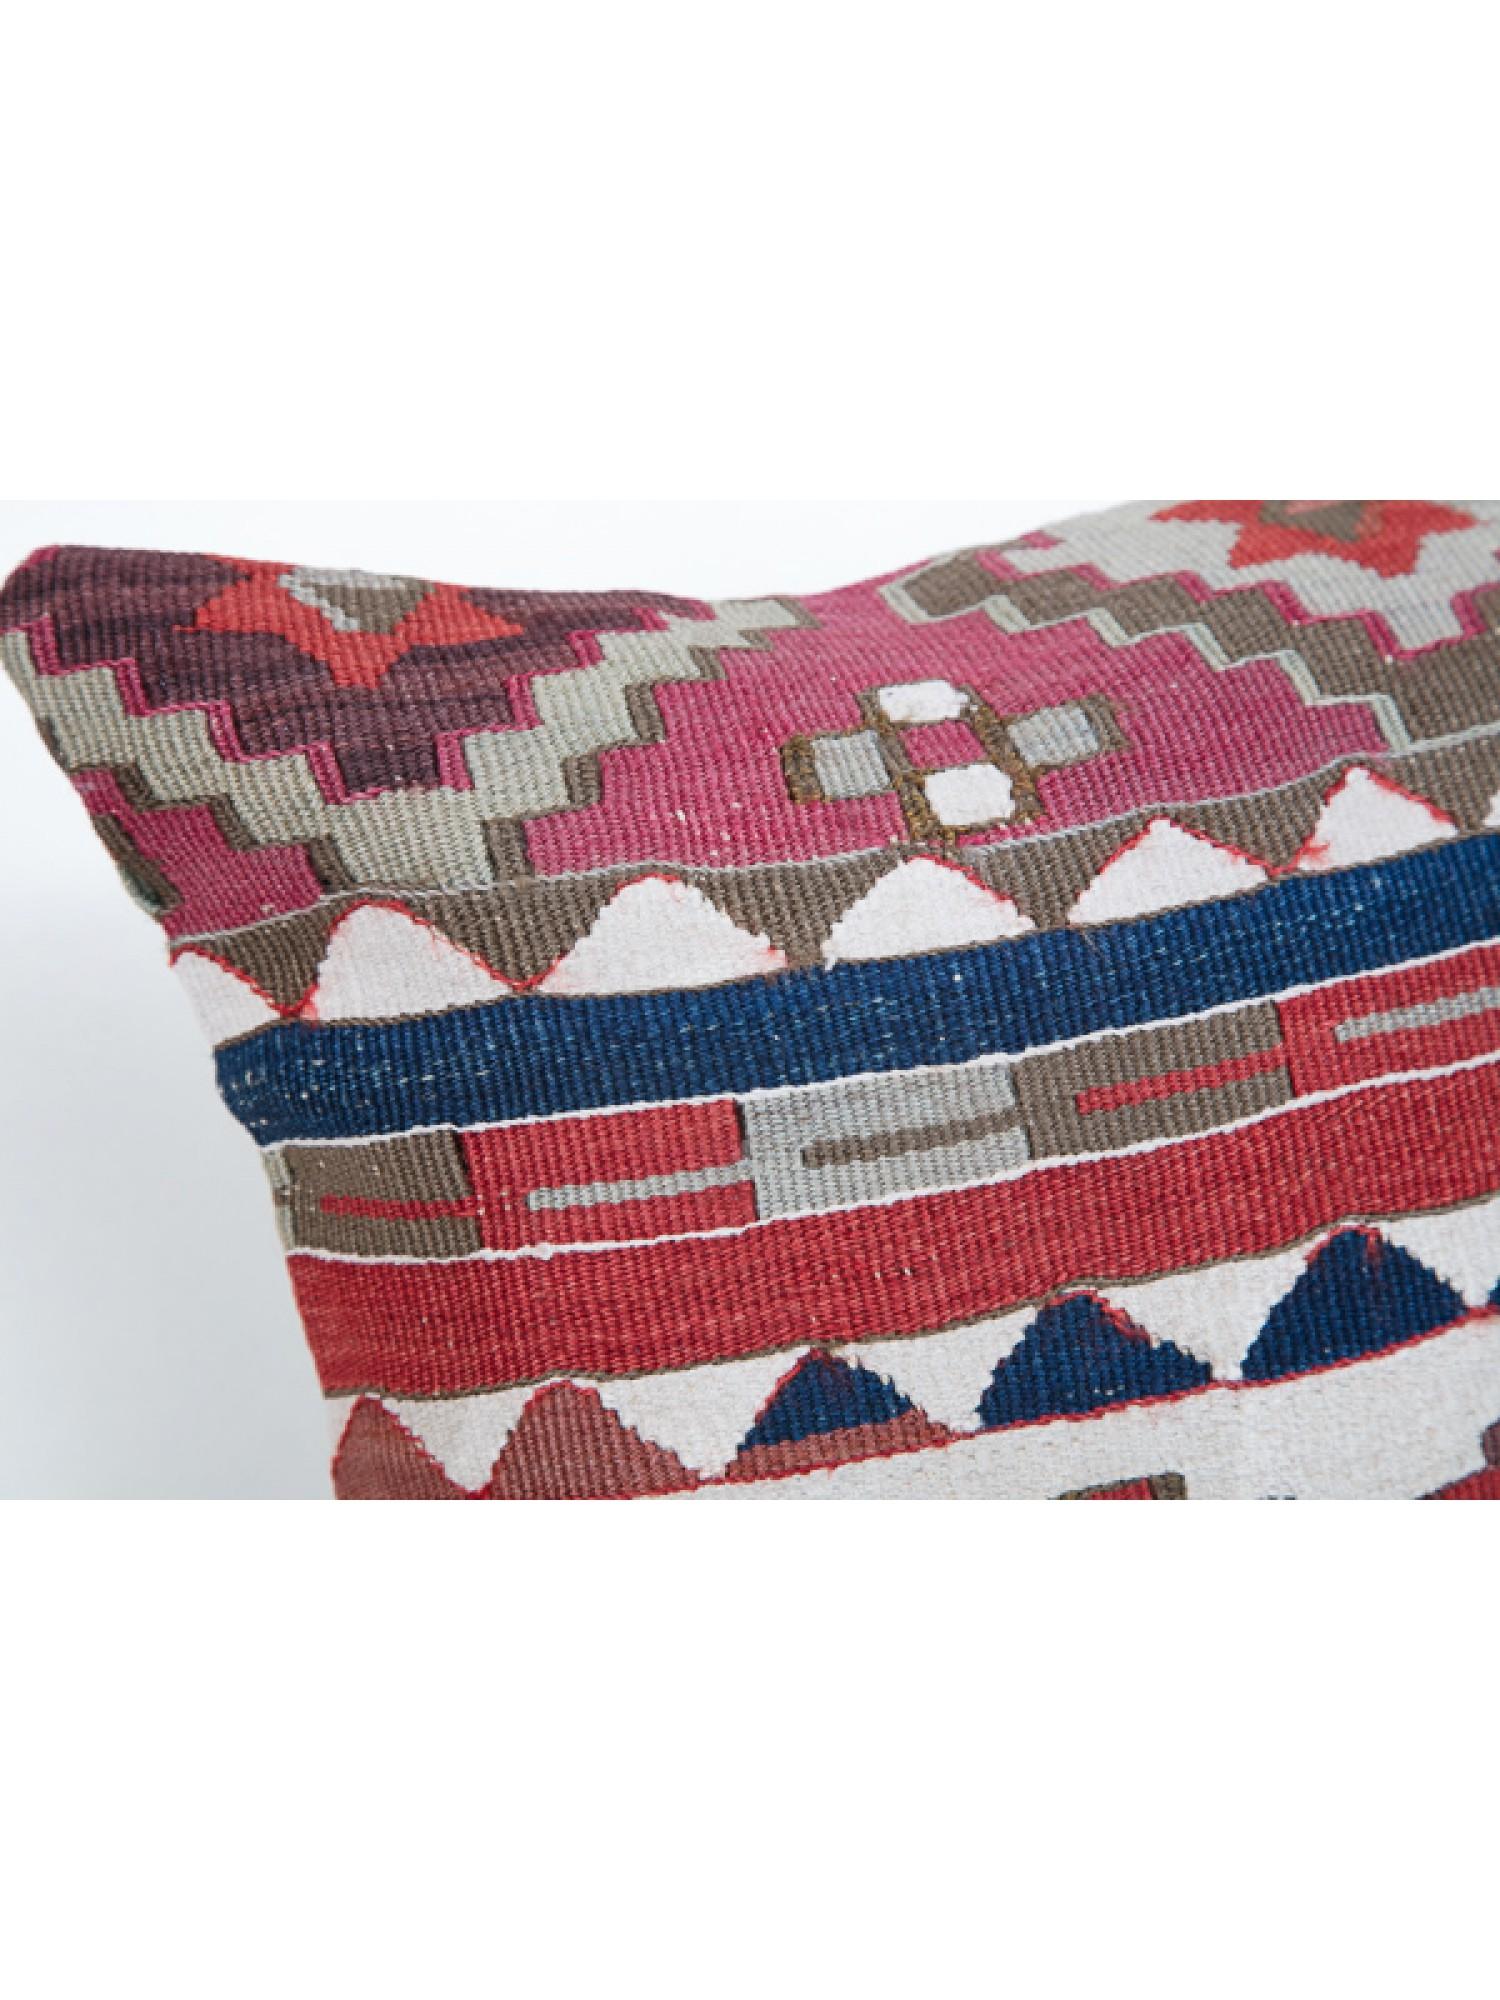 We made a cushion cover using the undamaged part of the precious and high-quality old & antique kilims that cannot be repaired as a whole. Like a painting, a part of the scenery is cut out from a kilim, and even several covers cut out from the same